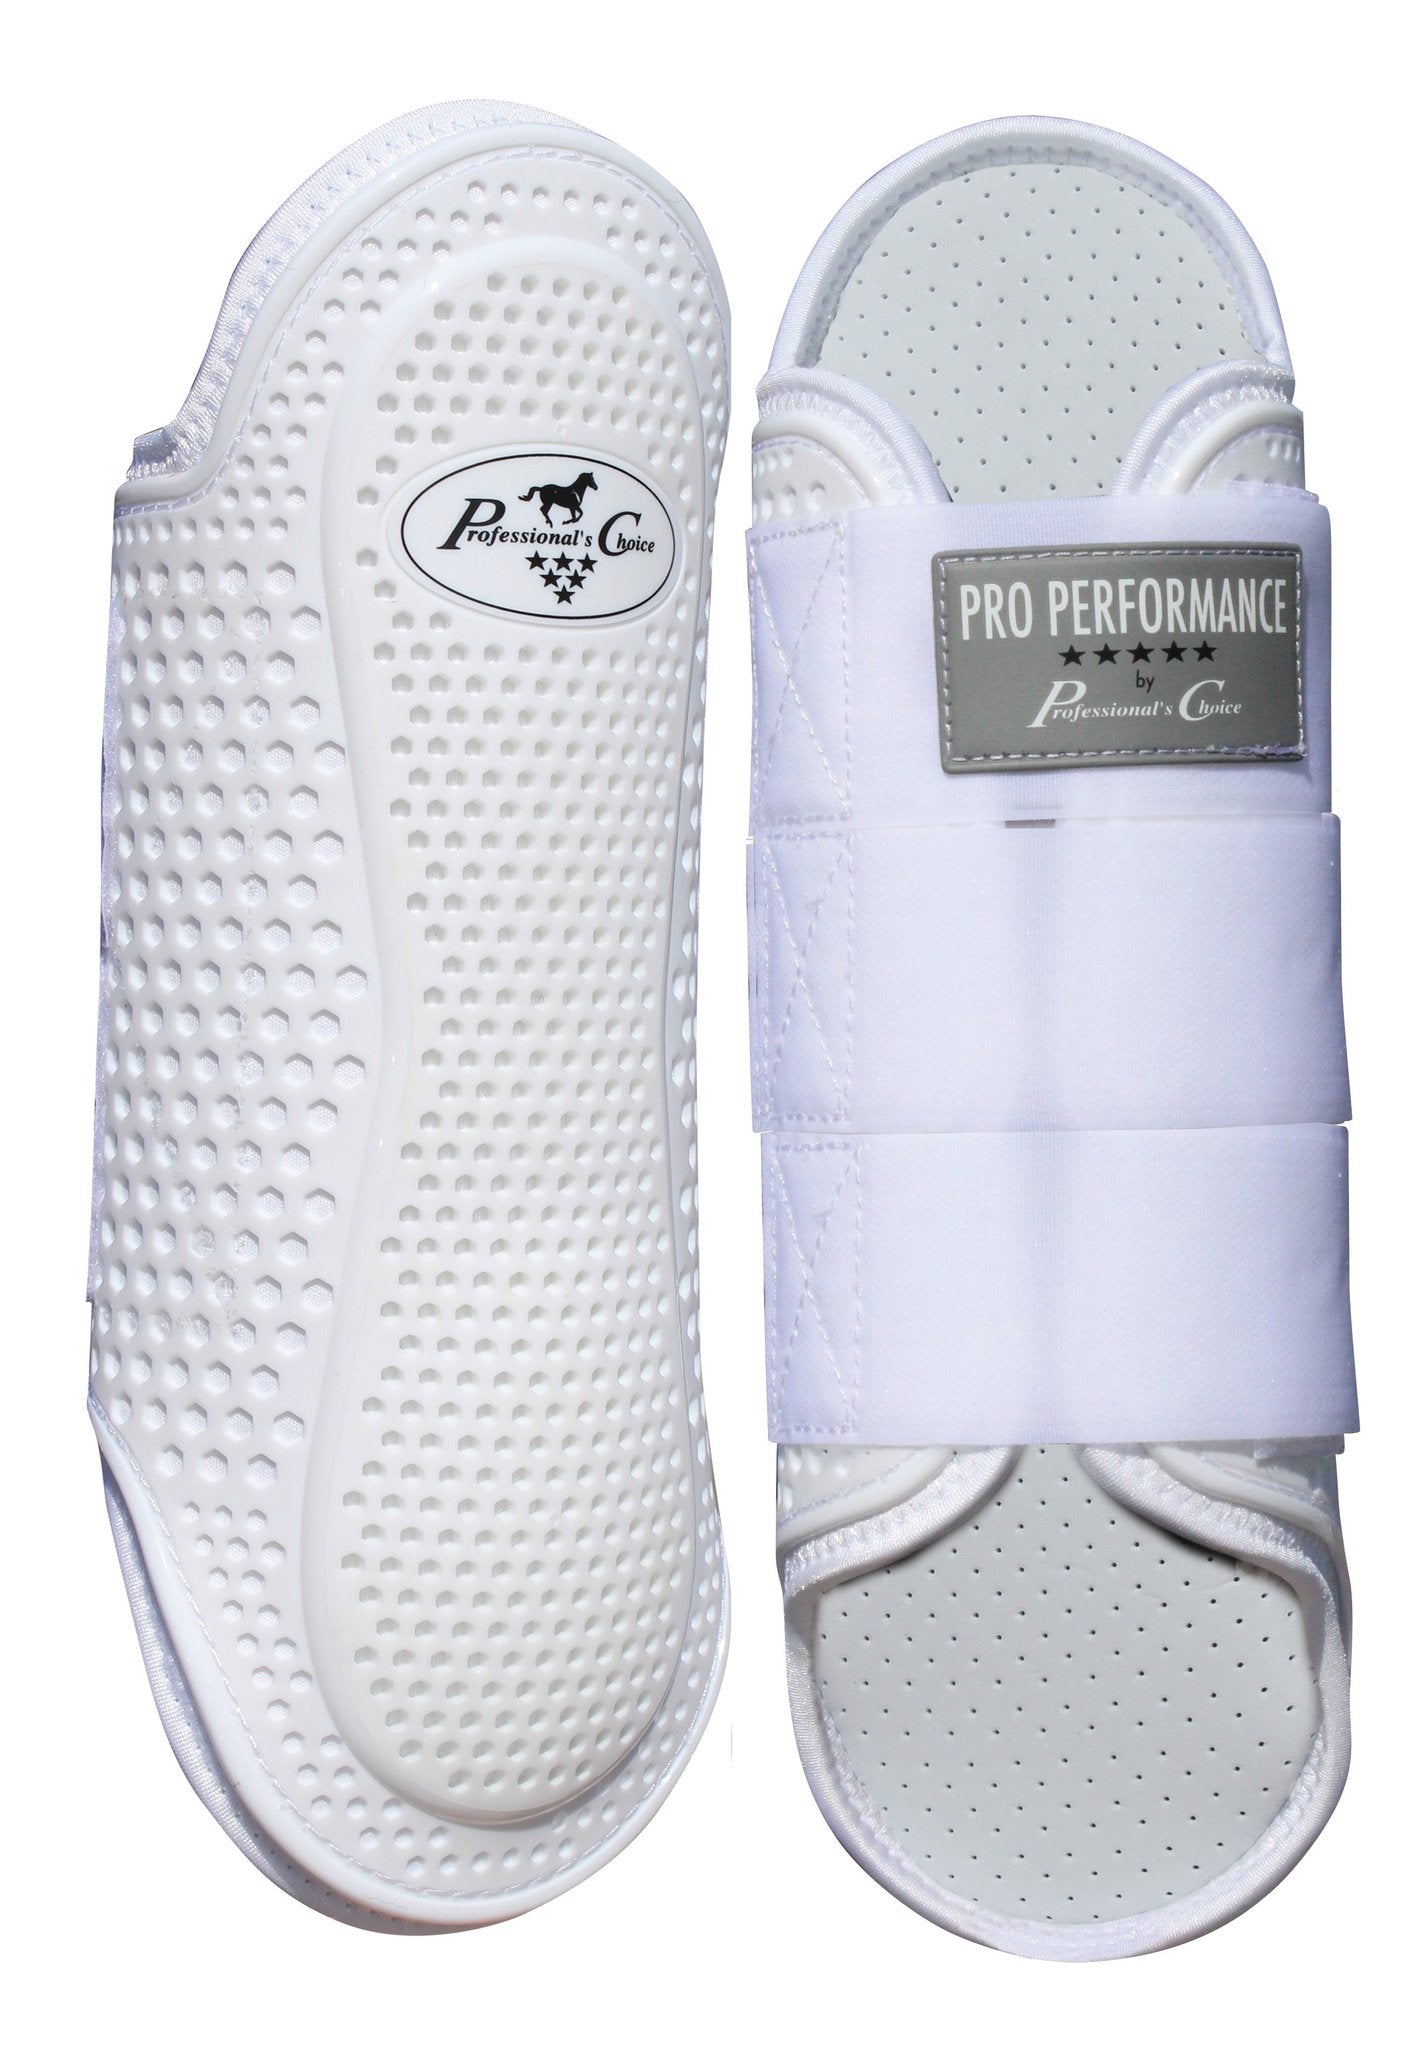 Pro Performance by Professional's Choice Pro Perf Hyb Splnt Boot - Breeches.com